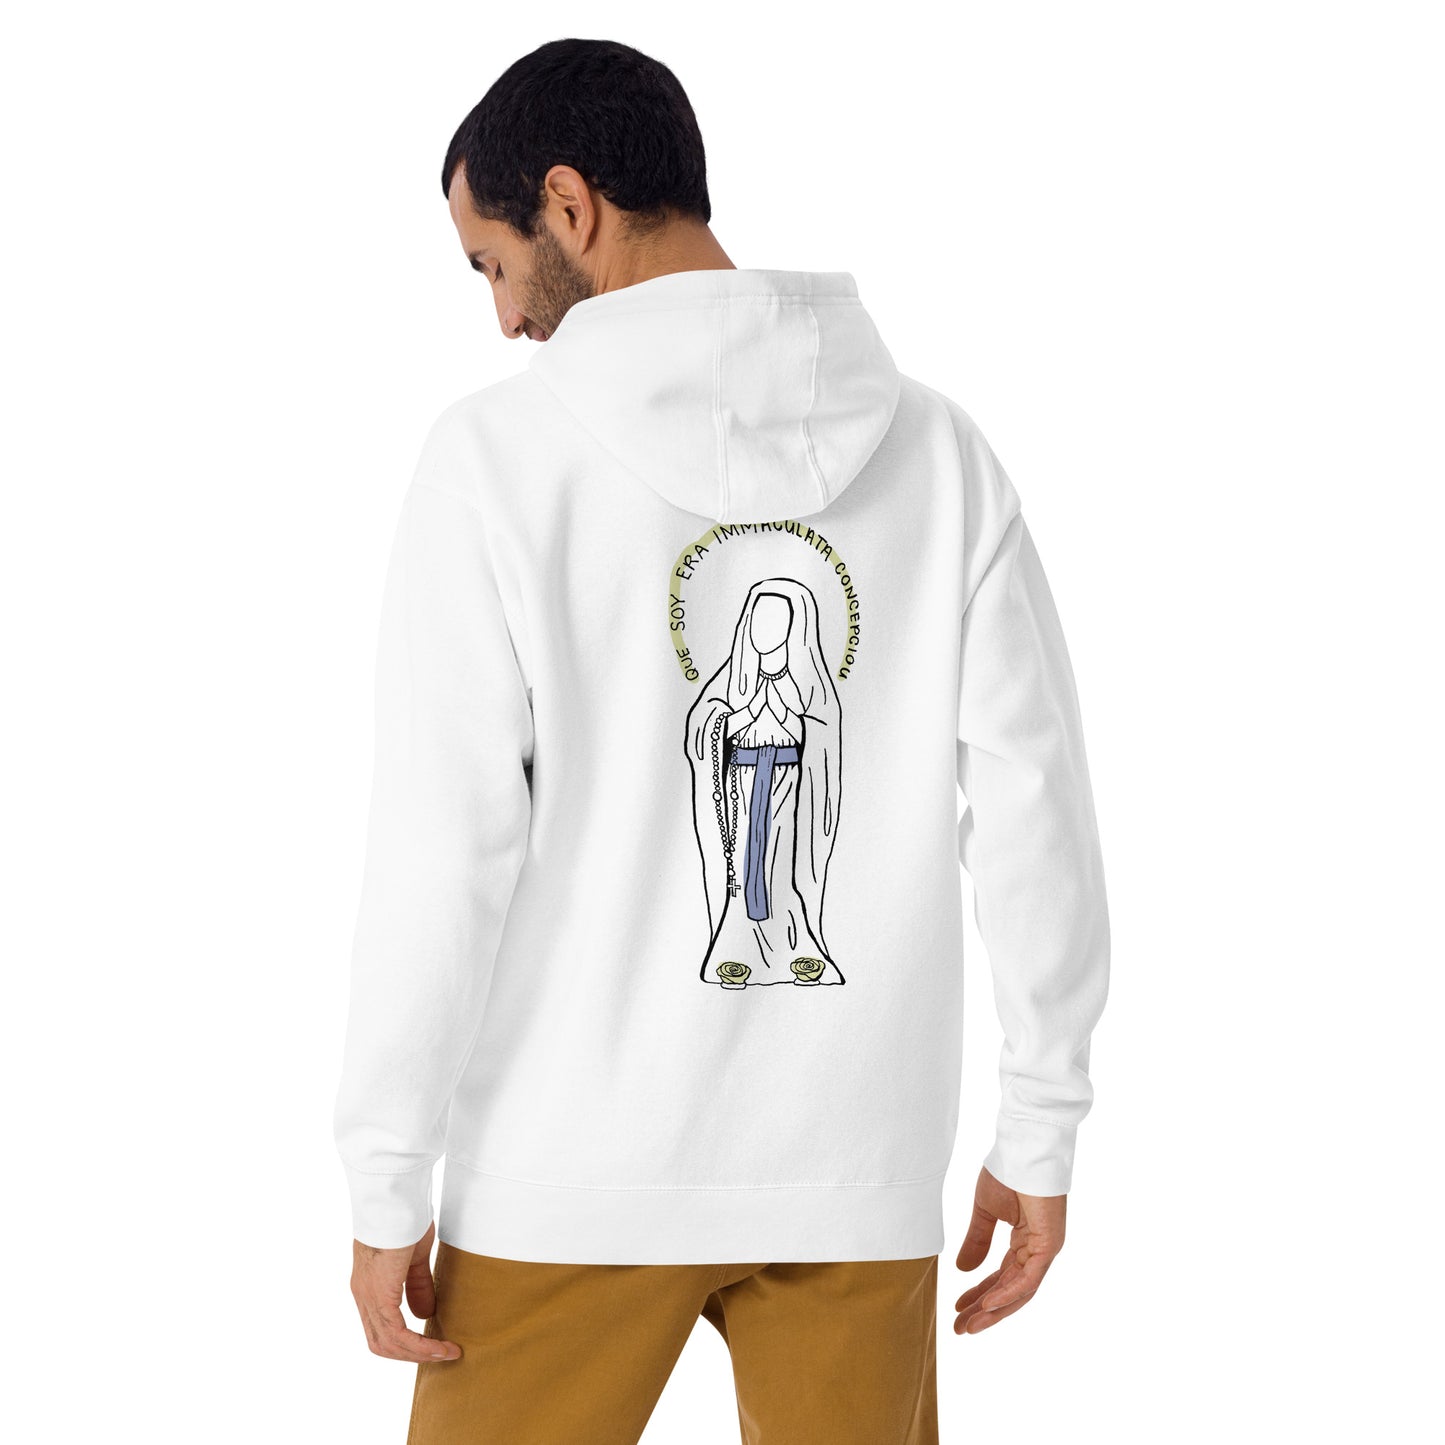 "Our Lady of Lourdes" - Unisex Hoodie